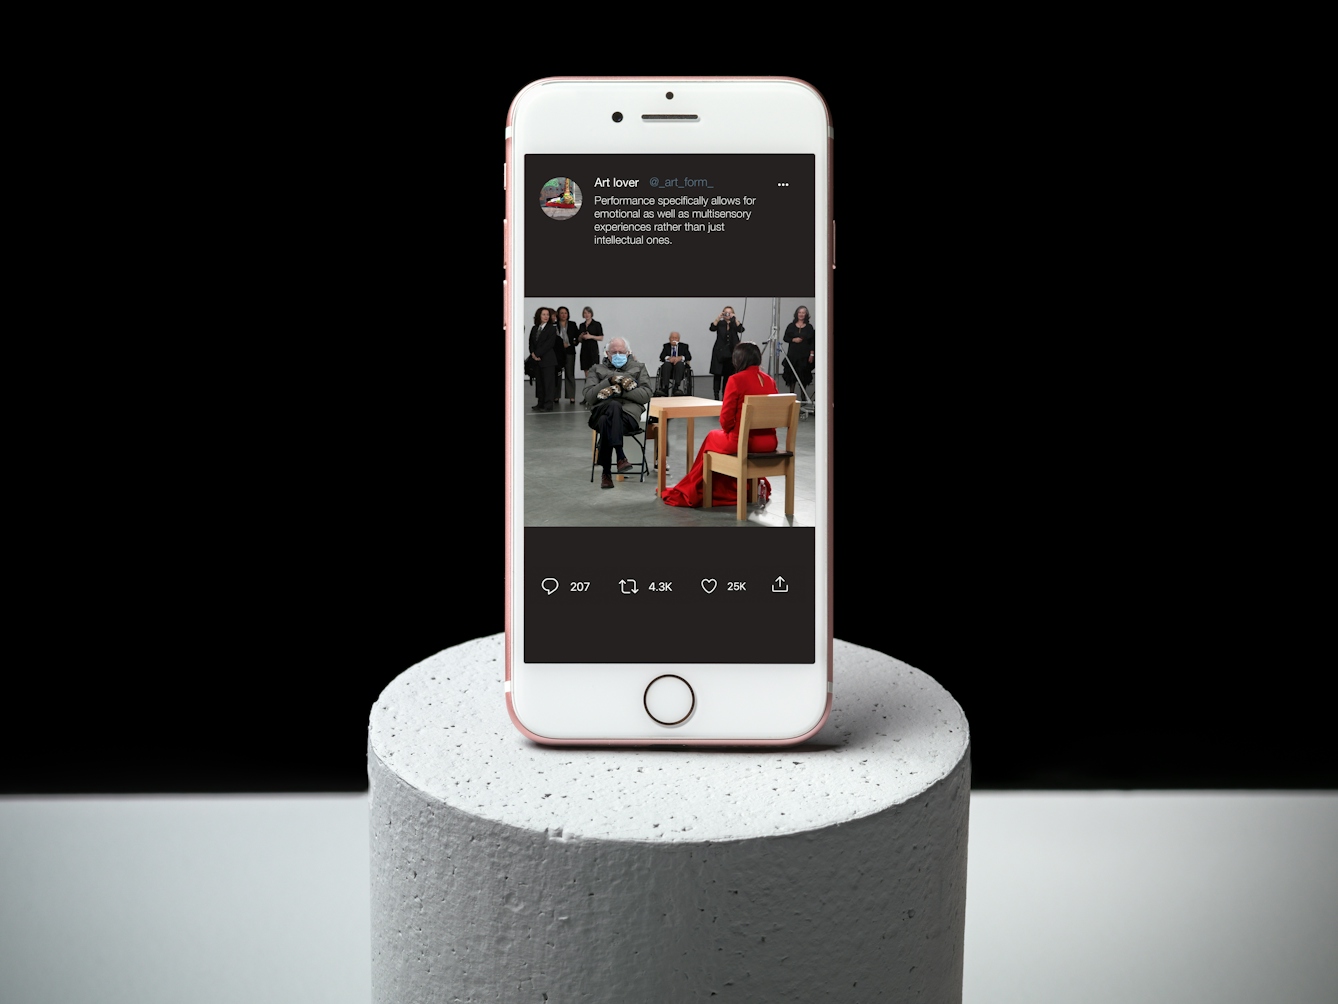 Photograph of a white mobile phone on a grey cylinder, with a grey and black background.  On the phone is a twitter page displaying a composite photograph of Bernie Sanders sitting in front of a woman in a red dress, surrounded by a watching crowd.  The twitter text reads “Performance Art specifically allows for emotional as well as multi sensory experiences rather than just intellectual ones.